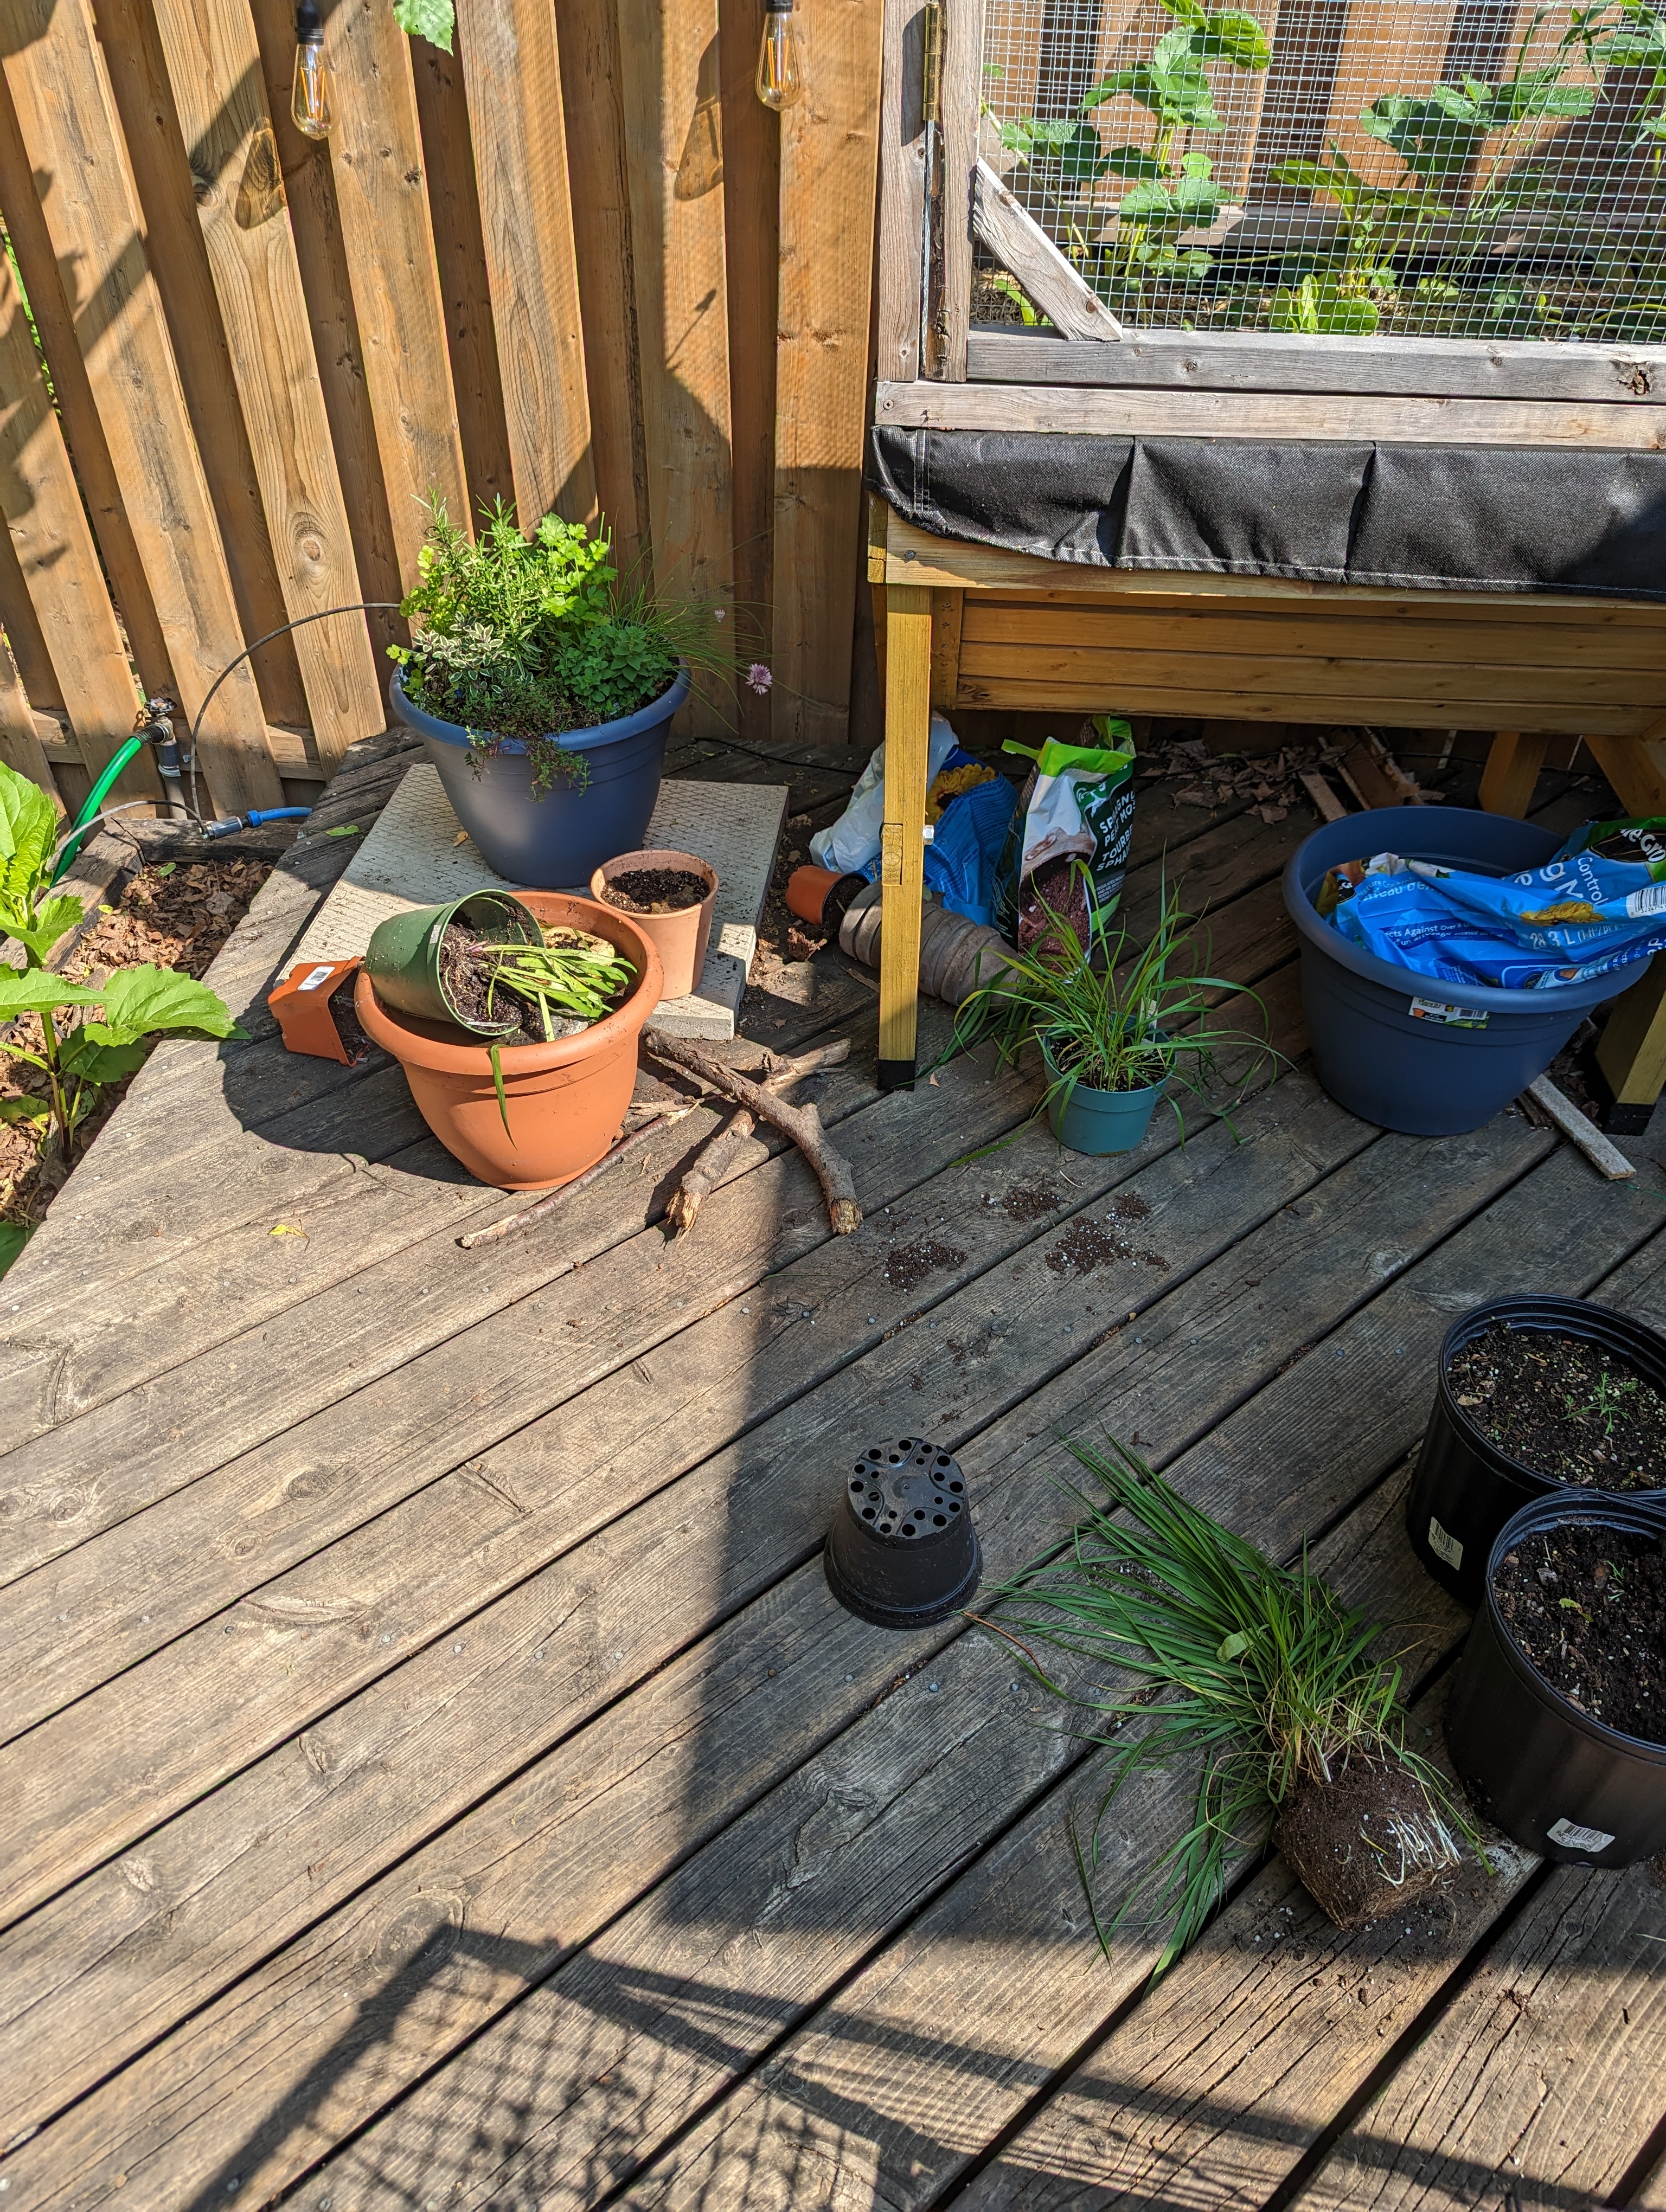 some plants with pots overturned or removed